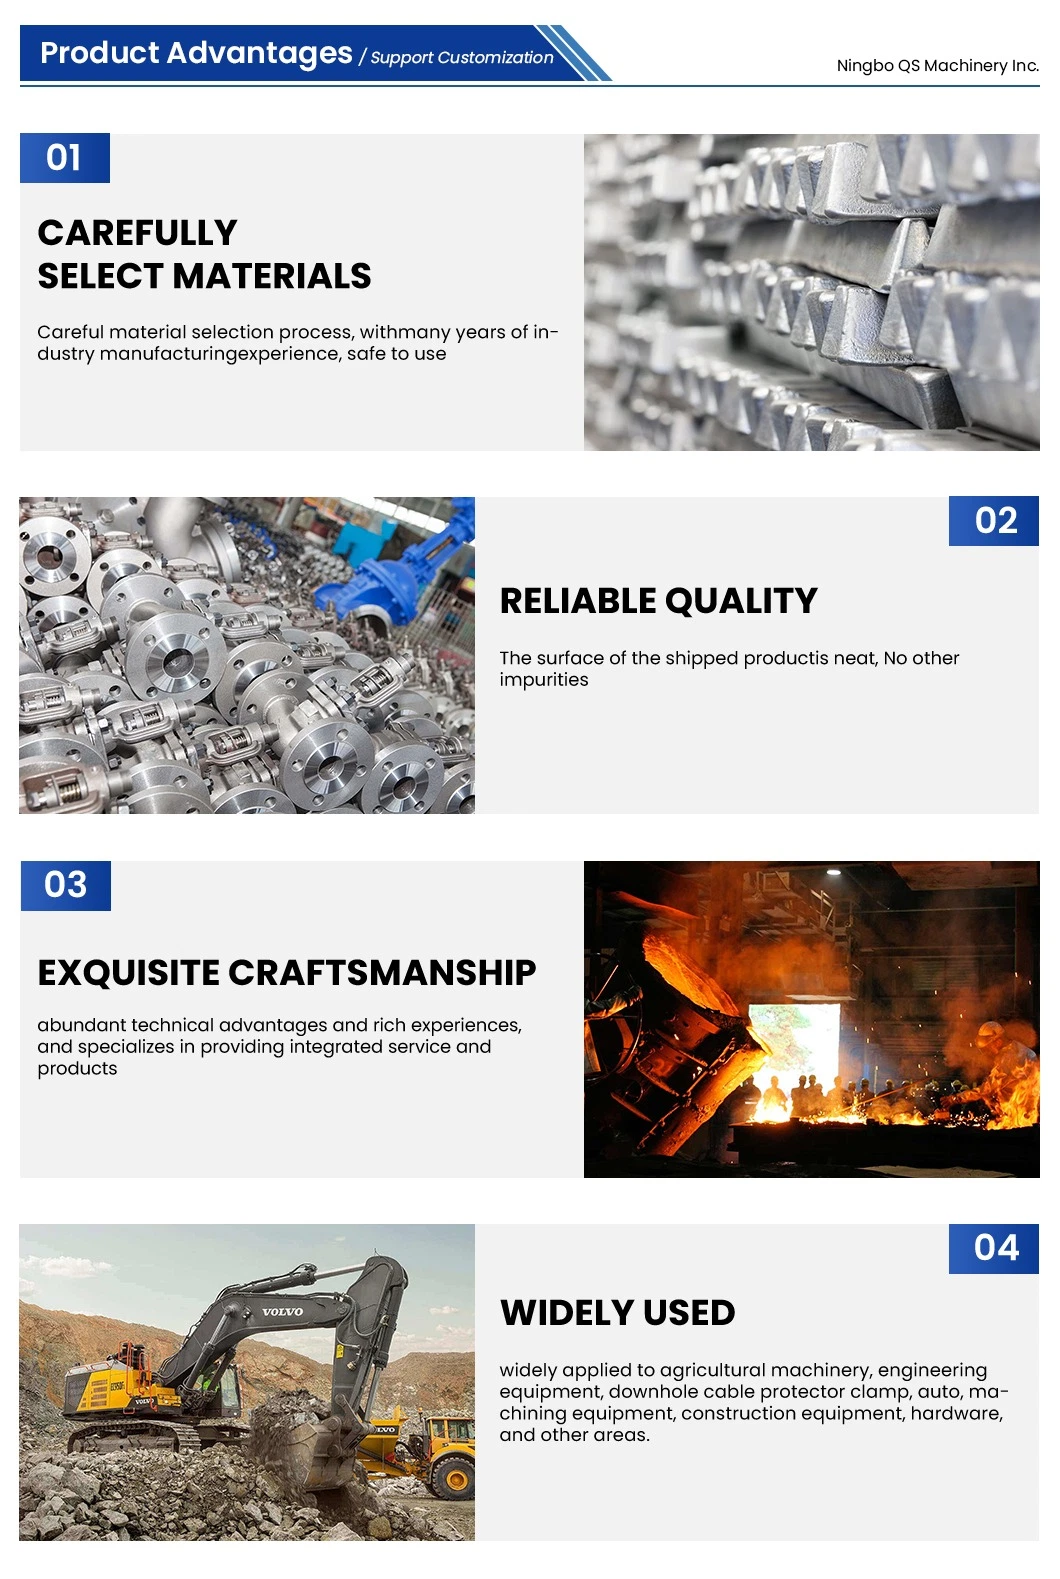 QS Machinery Green Sand Casting Products ODM Carbon Steel Investment Casting Services China Casting Aluminum Metal Casting Parts for Farm Machinery Parts